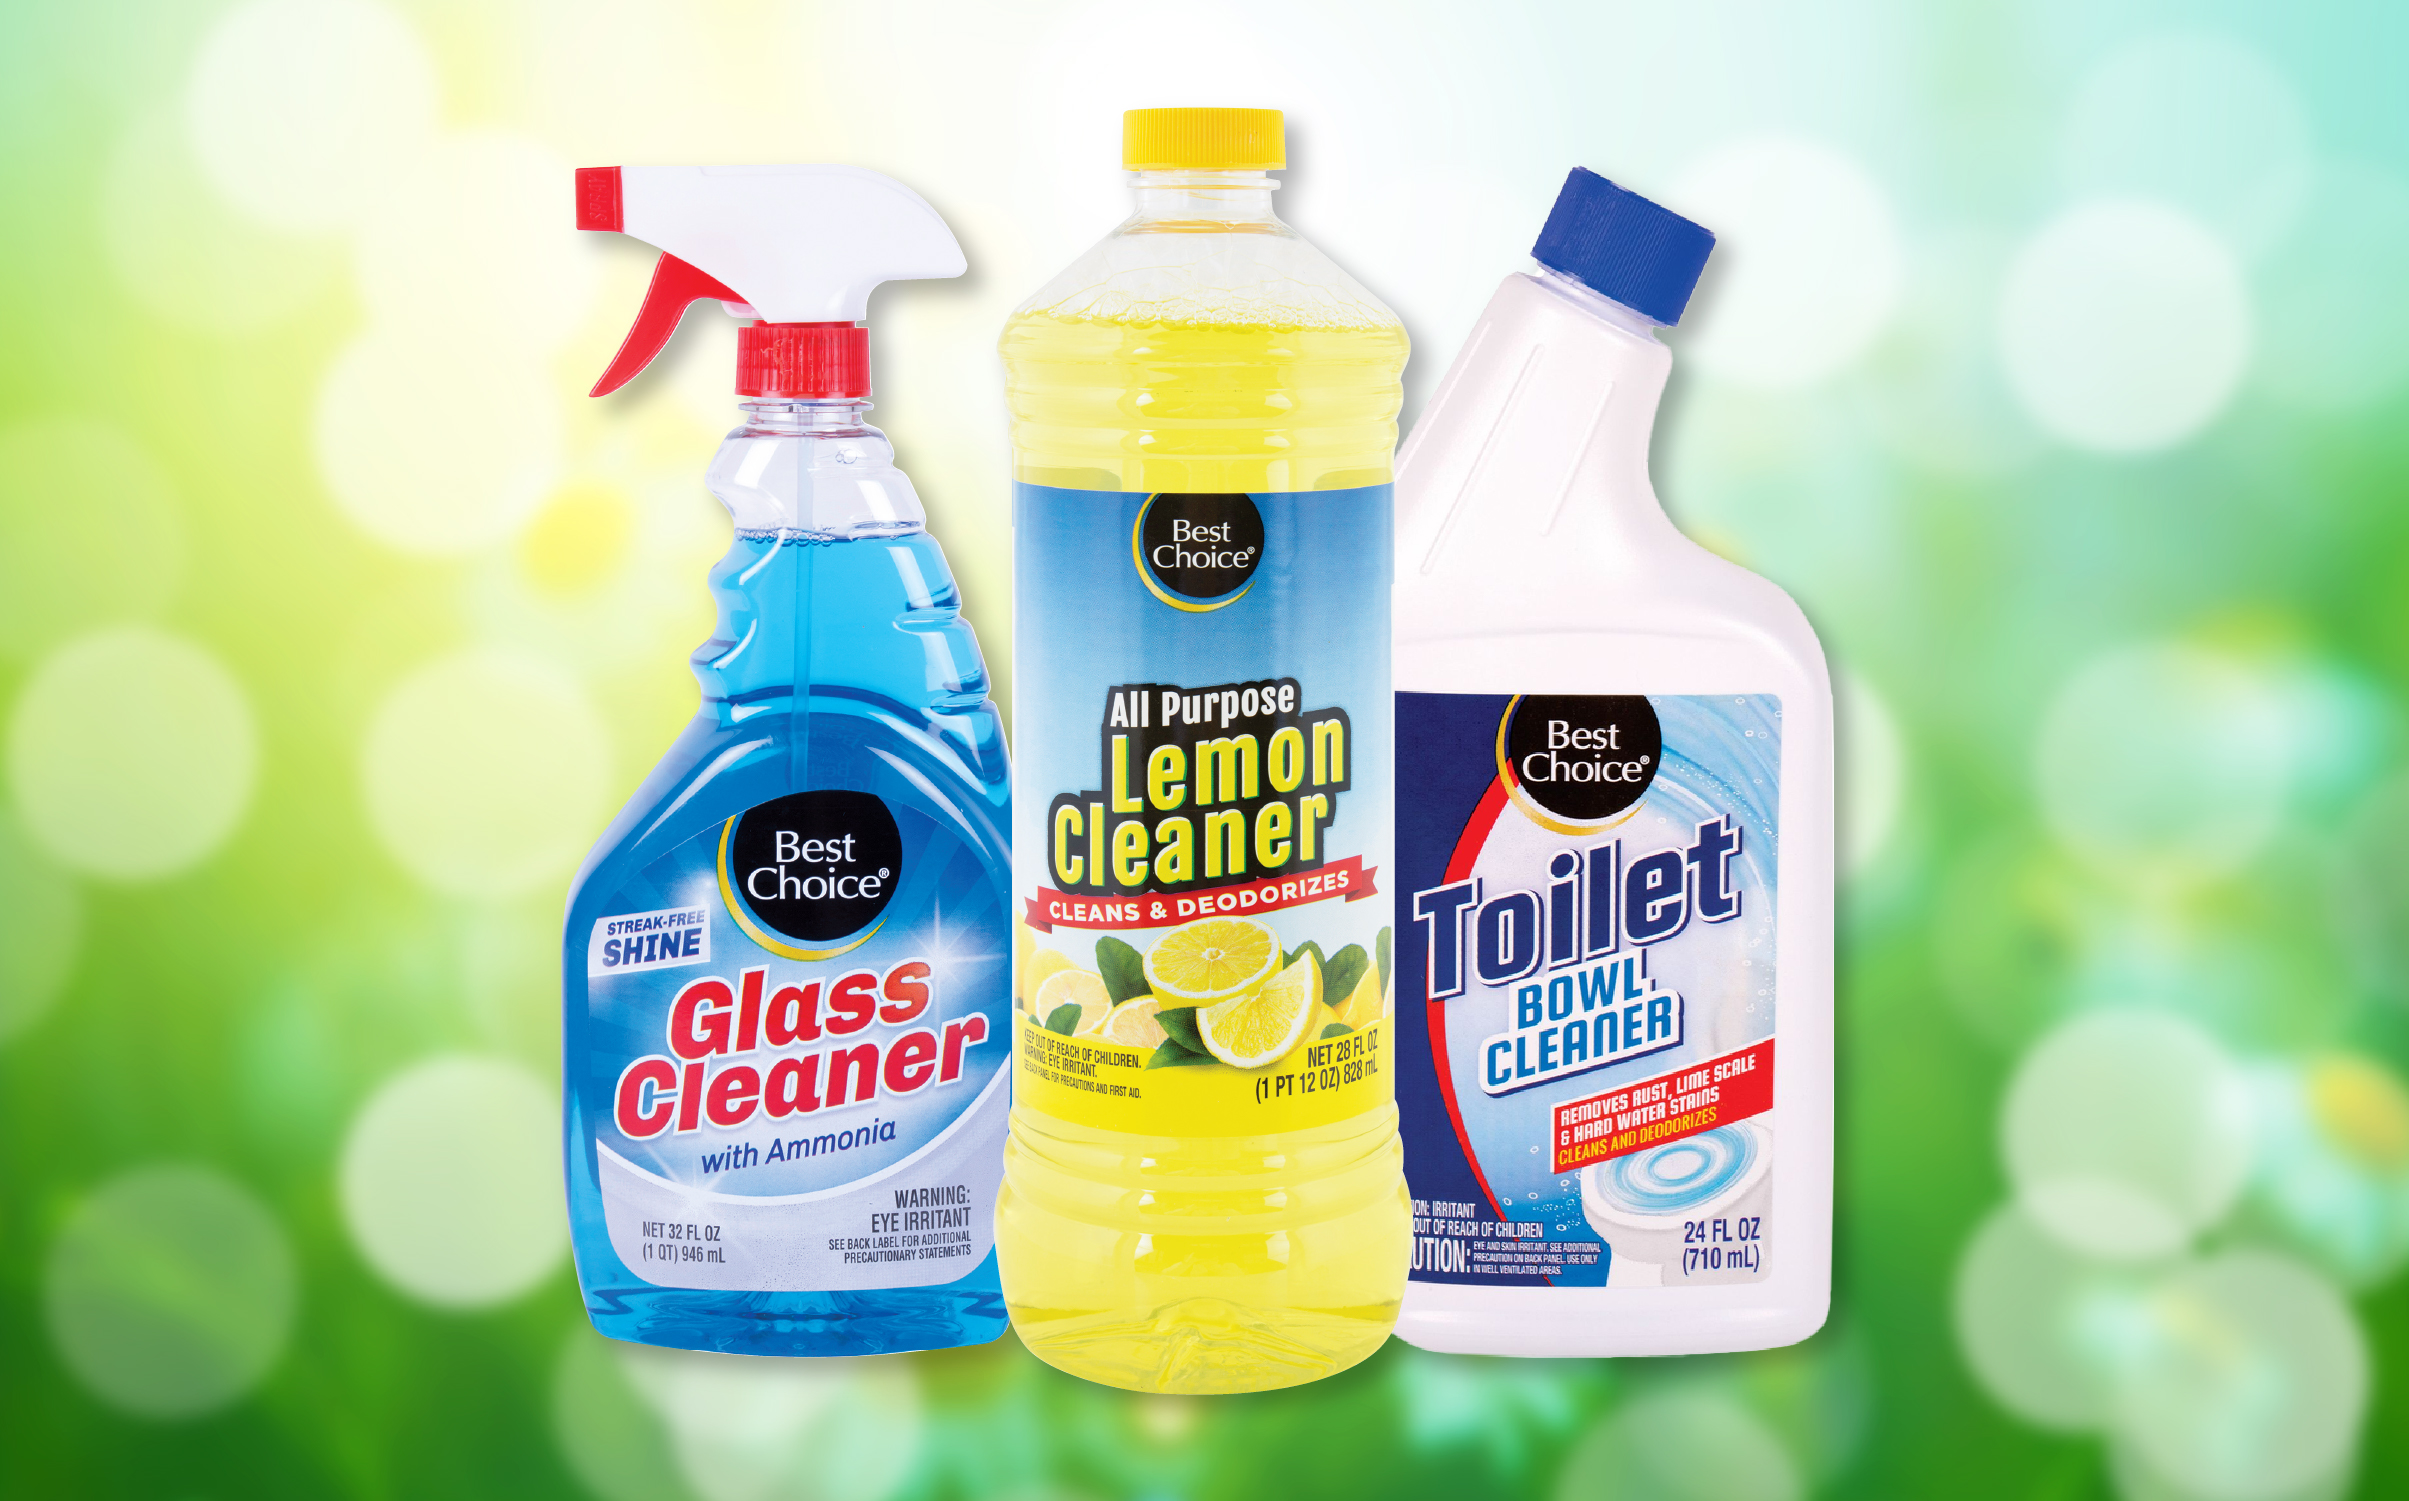 Liquid Cleaners Featured Products